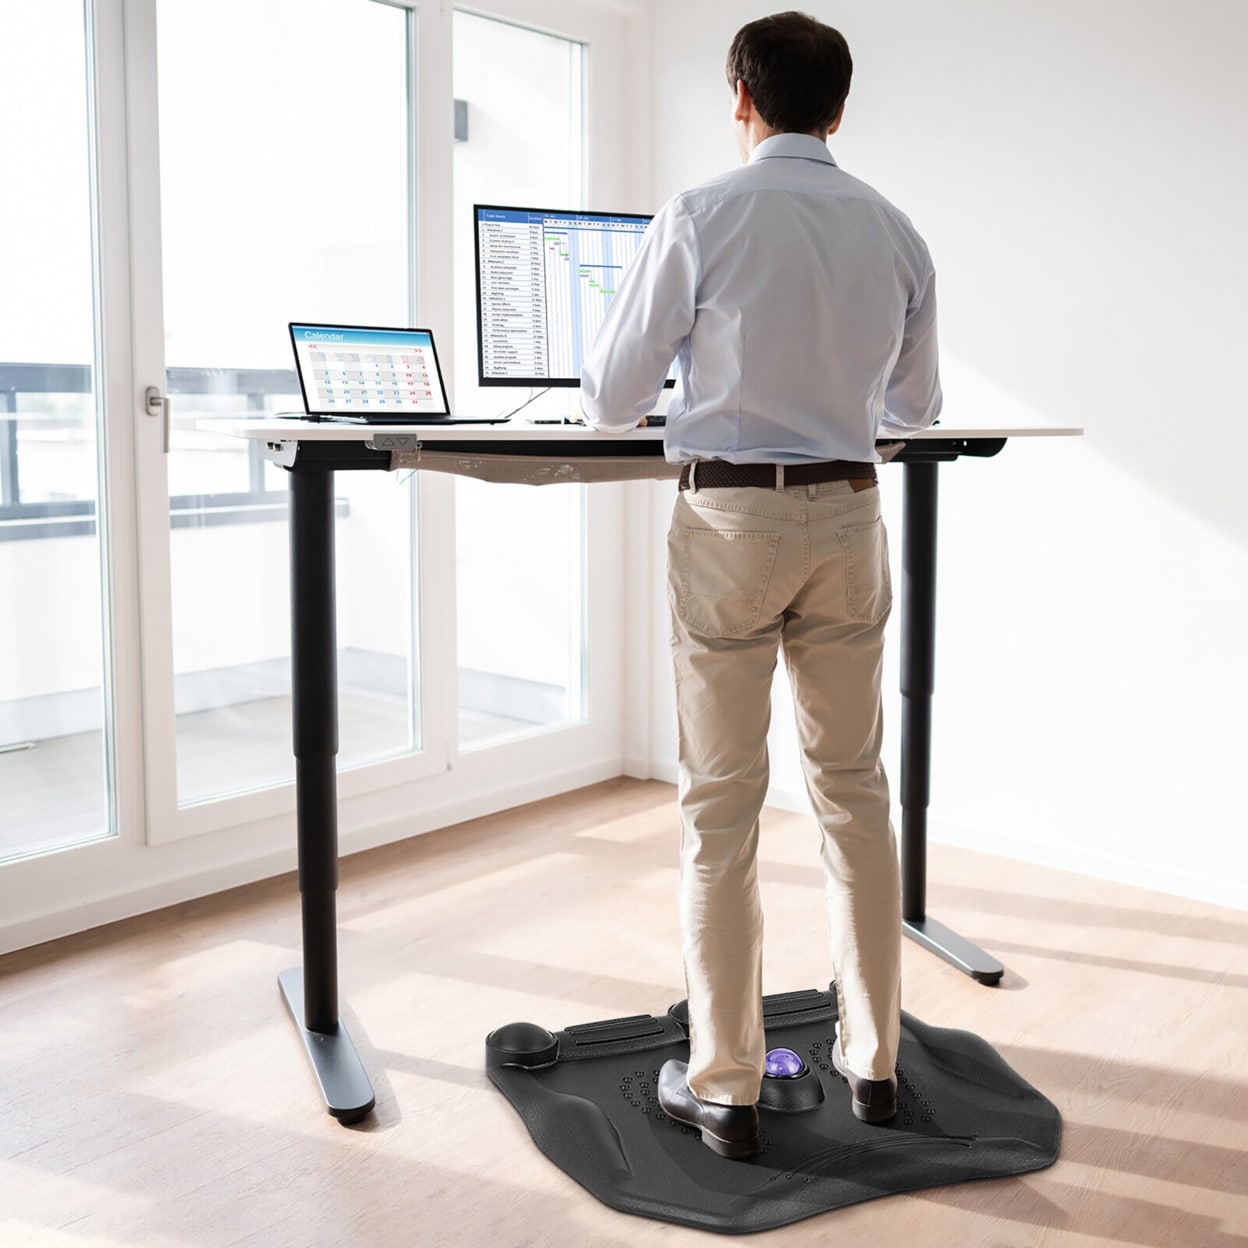 https://ak1.ostkcdn.com/images/products/is/images/direct/4c7300cf8d162ab795e76c5159ad33c28a1edeb9/Gymax-Anti-Fatigue-Standing-Desk-Mat-with-Massage-Roller-Ball-Foot-Massage-Points-Office.jpg